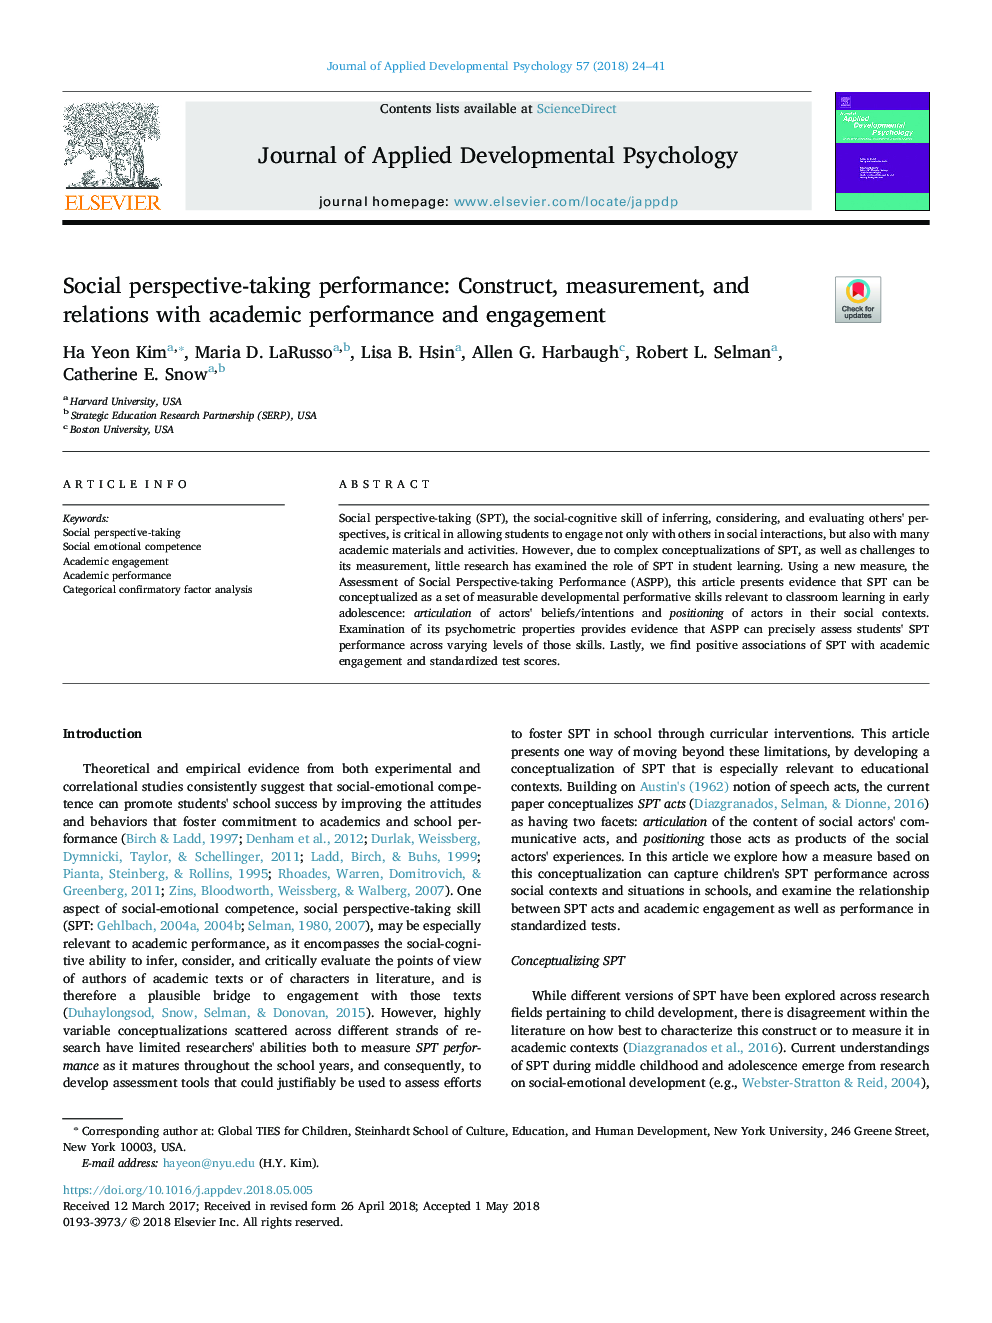 Social perspective-taking performance: Construct, measurement, and relations with academic performance and engagement